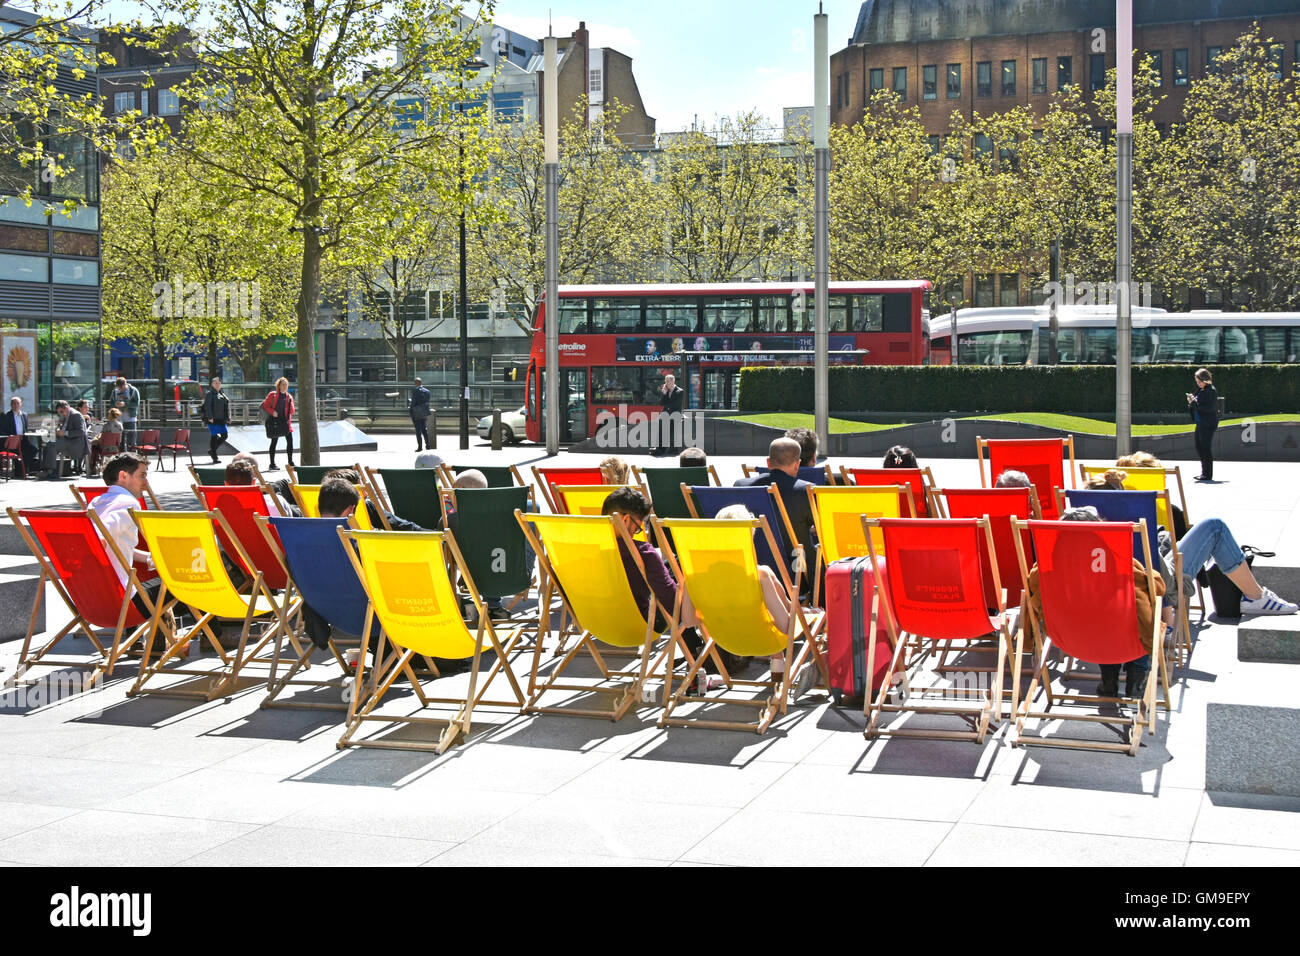 People using colourful deck chairs placed outside office buildings in Central London England UK on a sunny late spring day traffic on busy road beyond Stock Photo